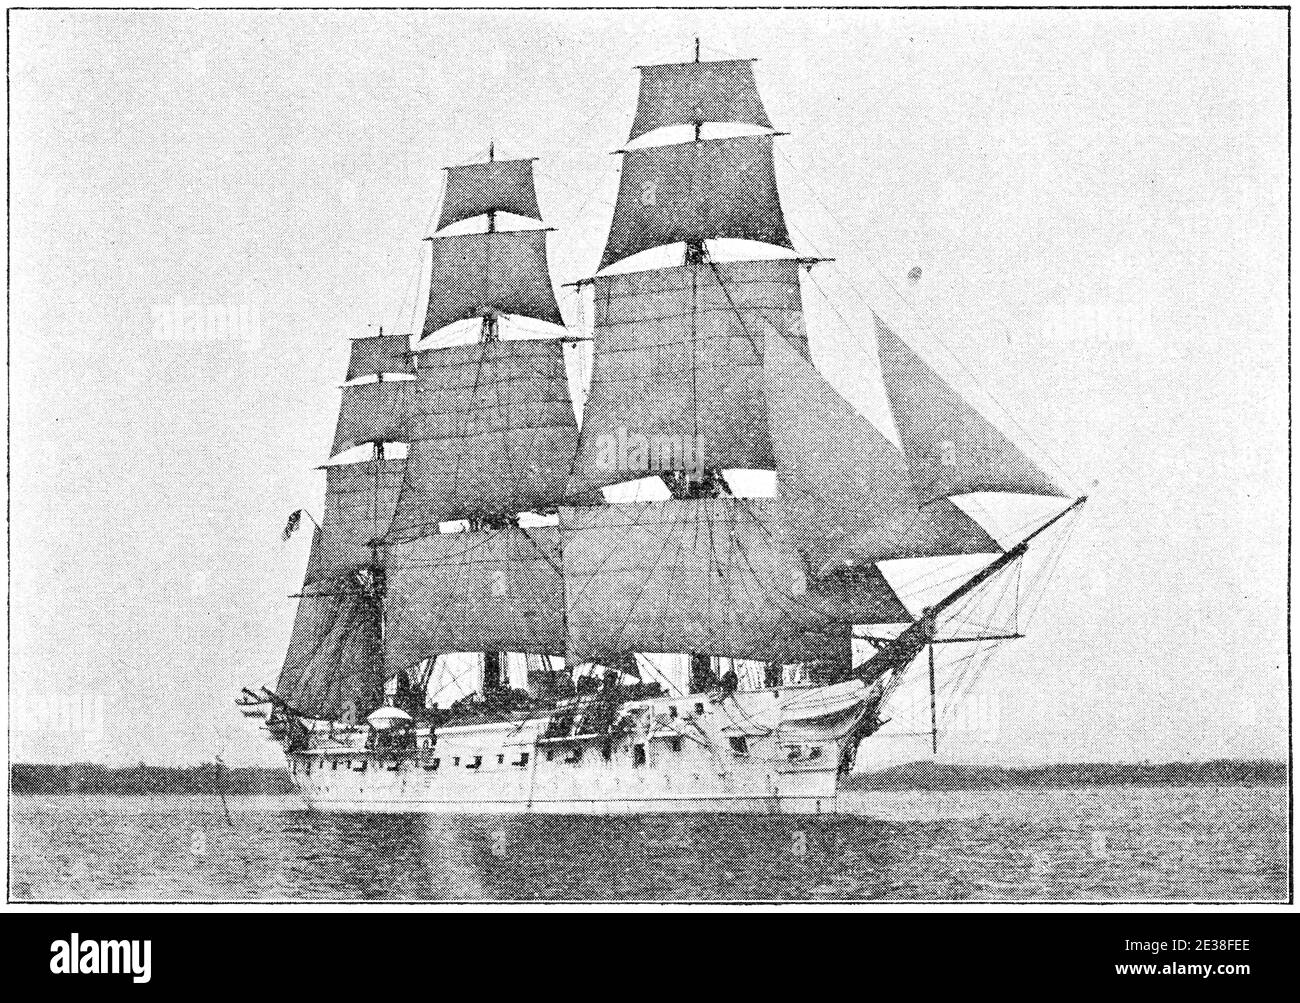 SMS Gneisenau (1879) - a Bismarck-class corvette built for the German Imperial Navy. Illustration of the 19th century. Germany. White background. Stock Photo